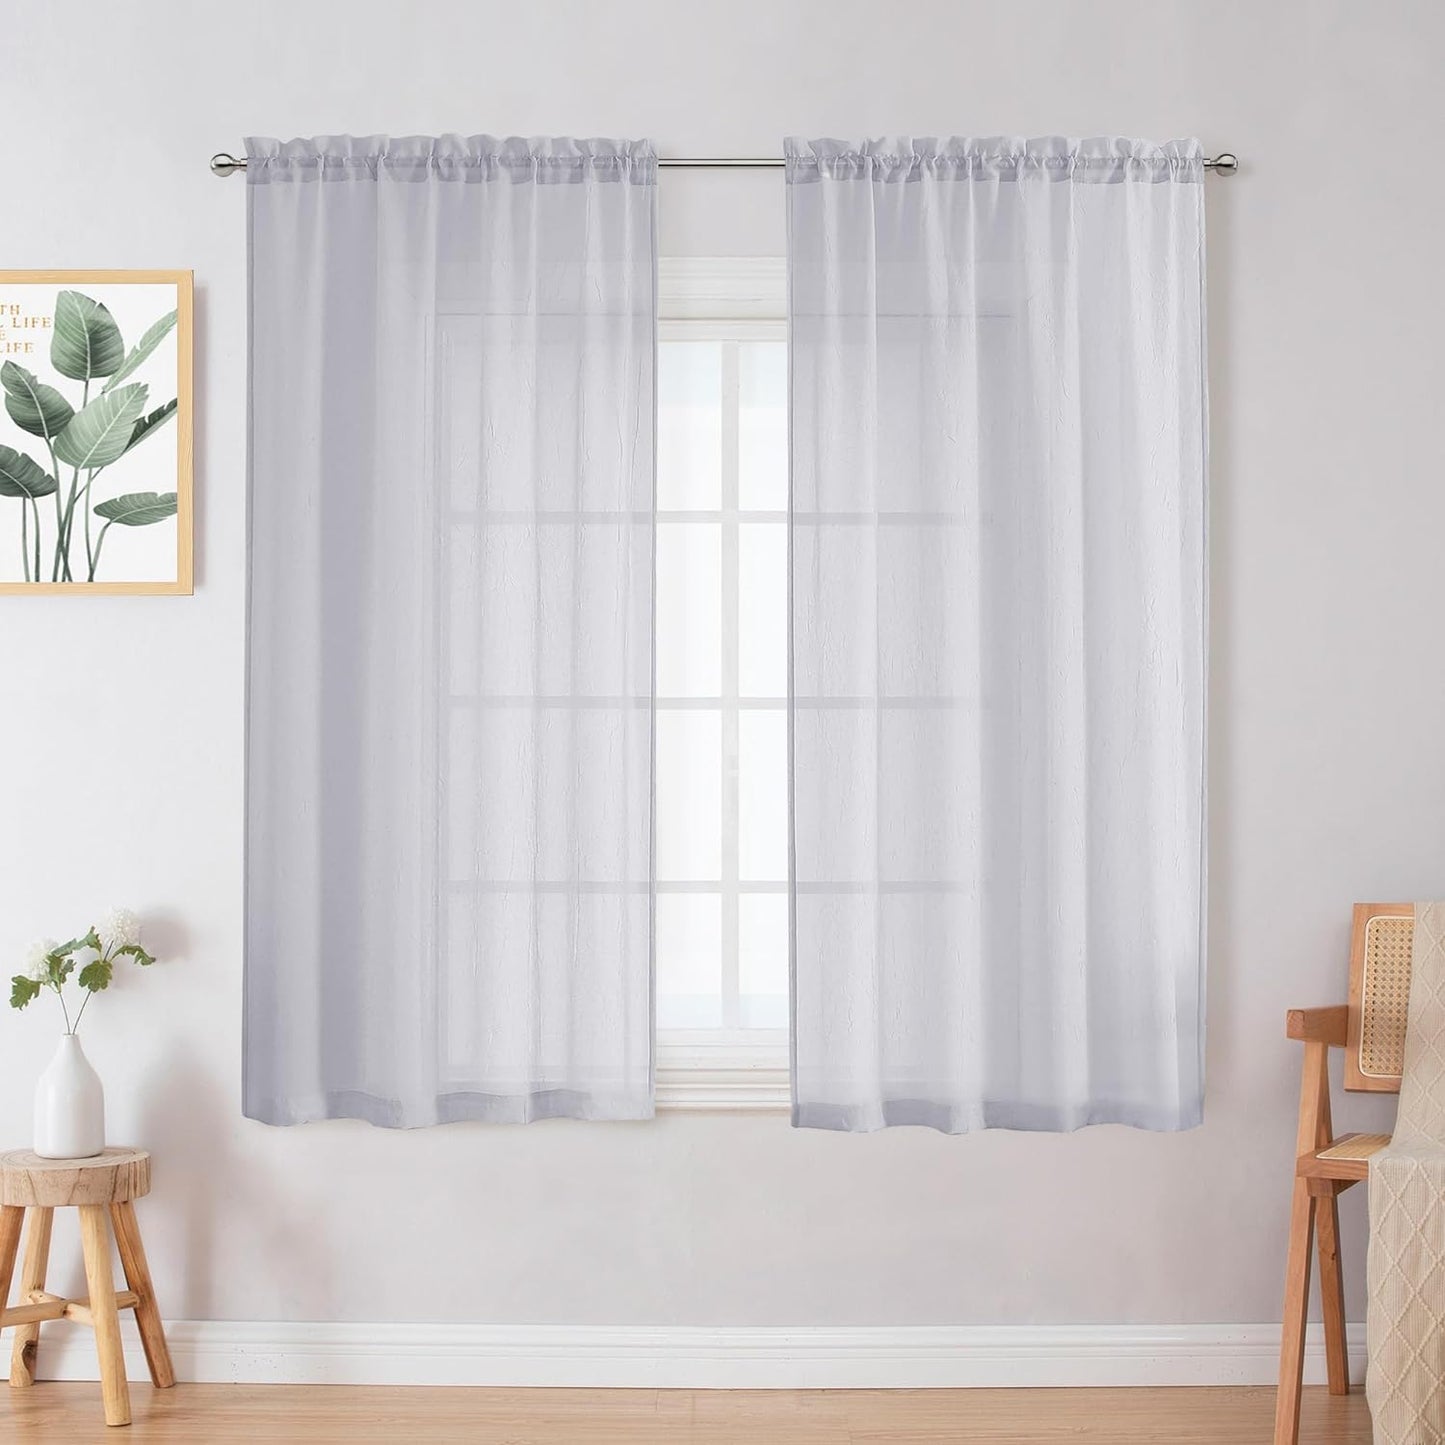 Crushed Sheer White Curtains 63 Inch Length 2 Panels, Light Filtering Solid Crinkle Voile Short Sheer Curtian for Bedroom Living Room, Each 42Wx63L Inches  Chyhomenyc Light Grey 28 W X 45 L 